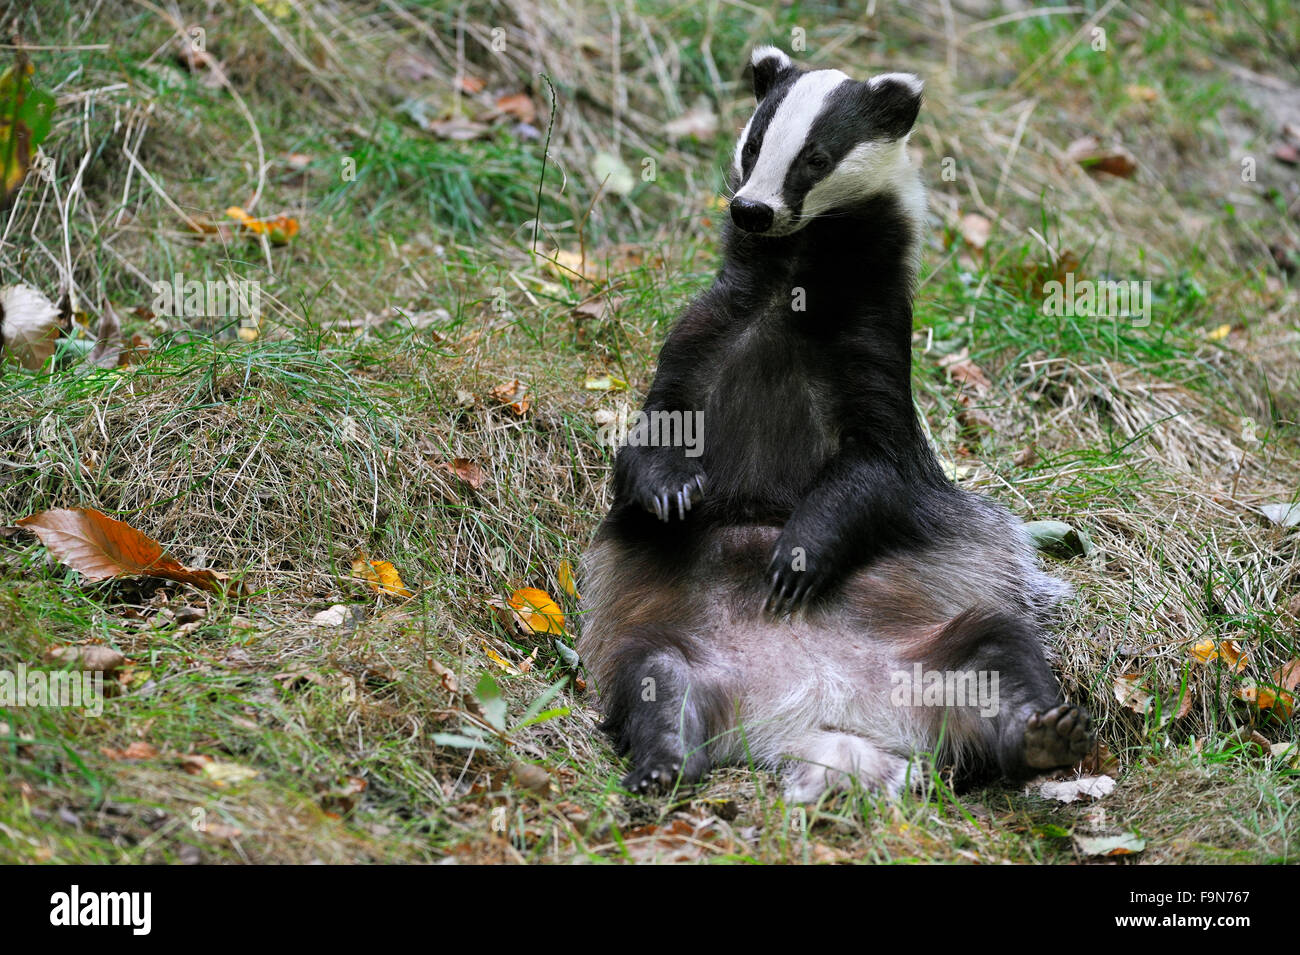 European badger (Meles meles) sitting upright in meadow Stock Photo